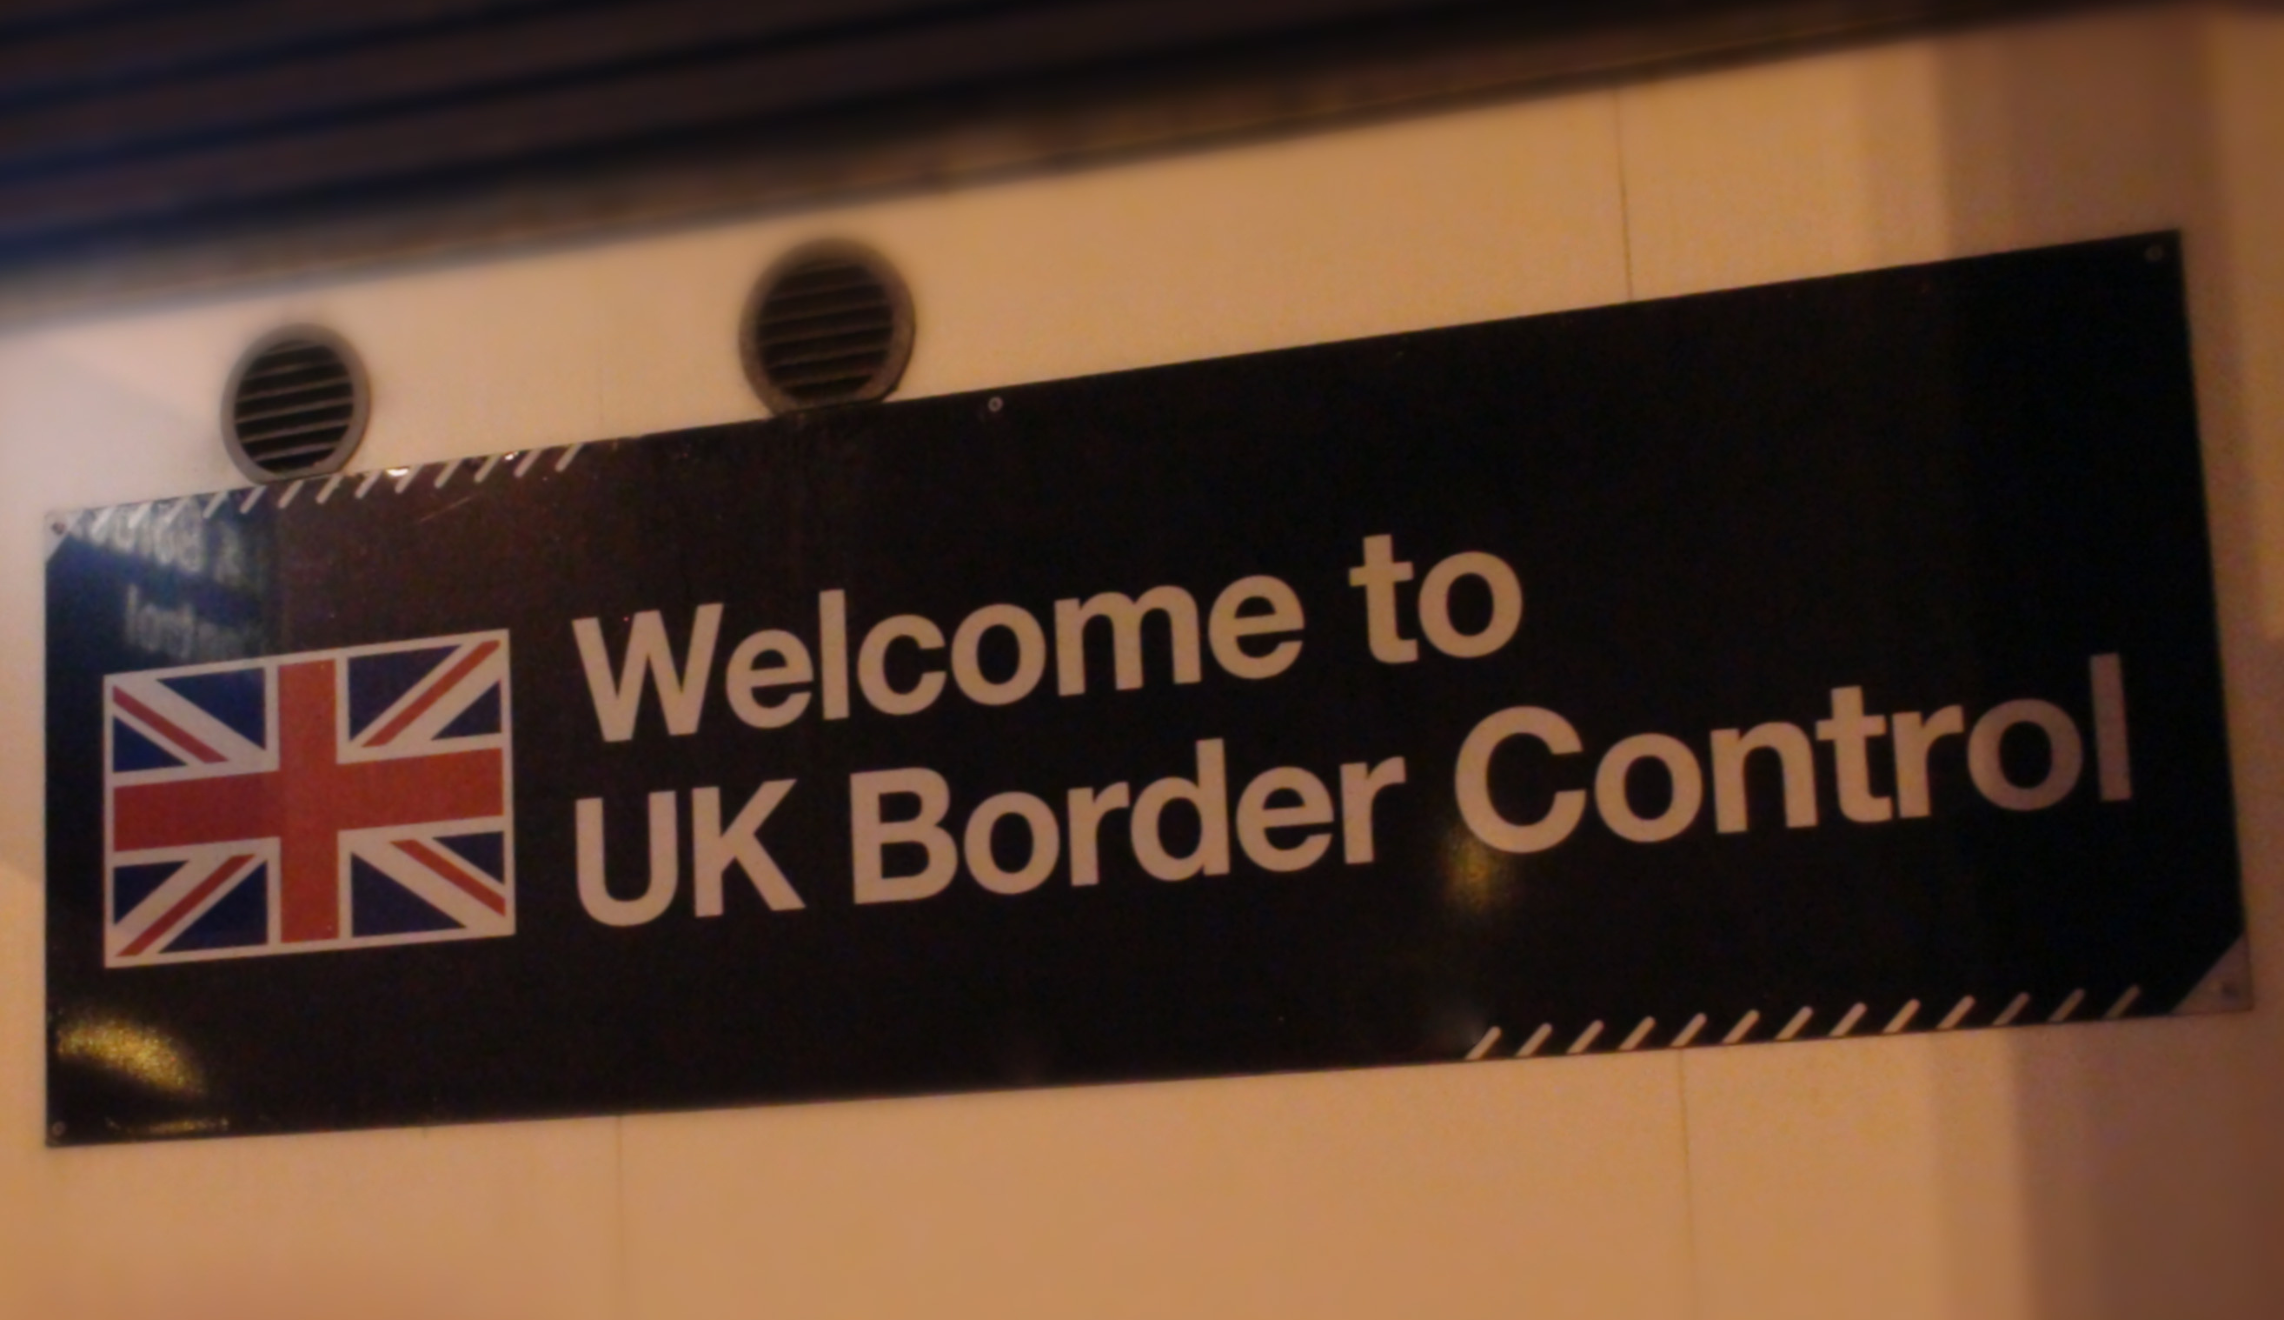 Clarity on new border checks is vital, says BCC Banner Photo